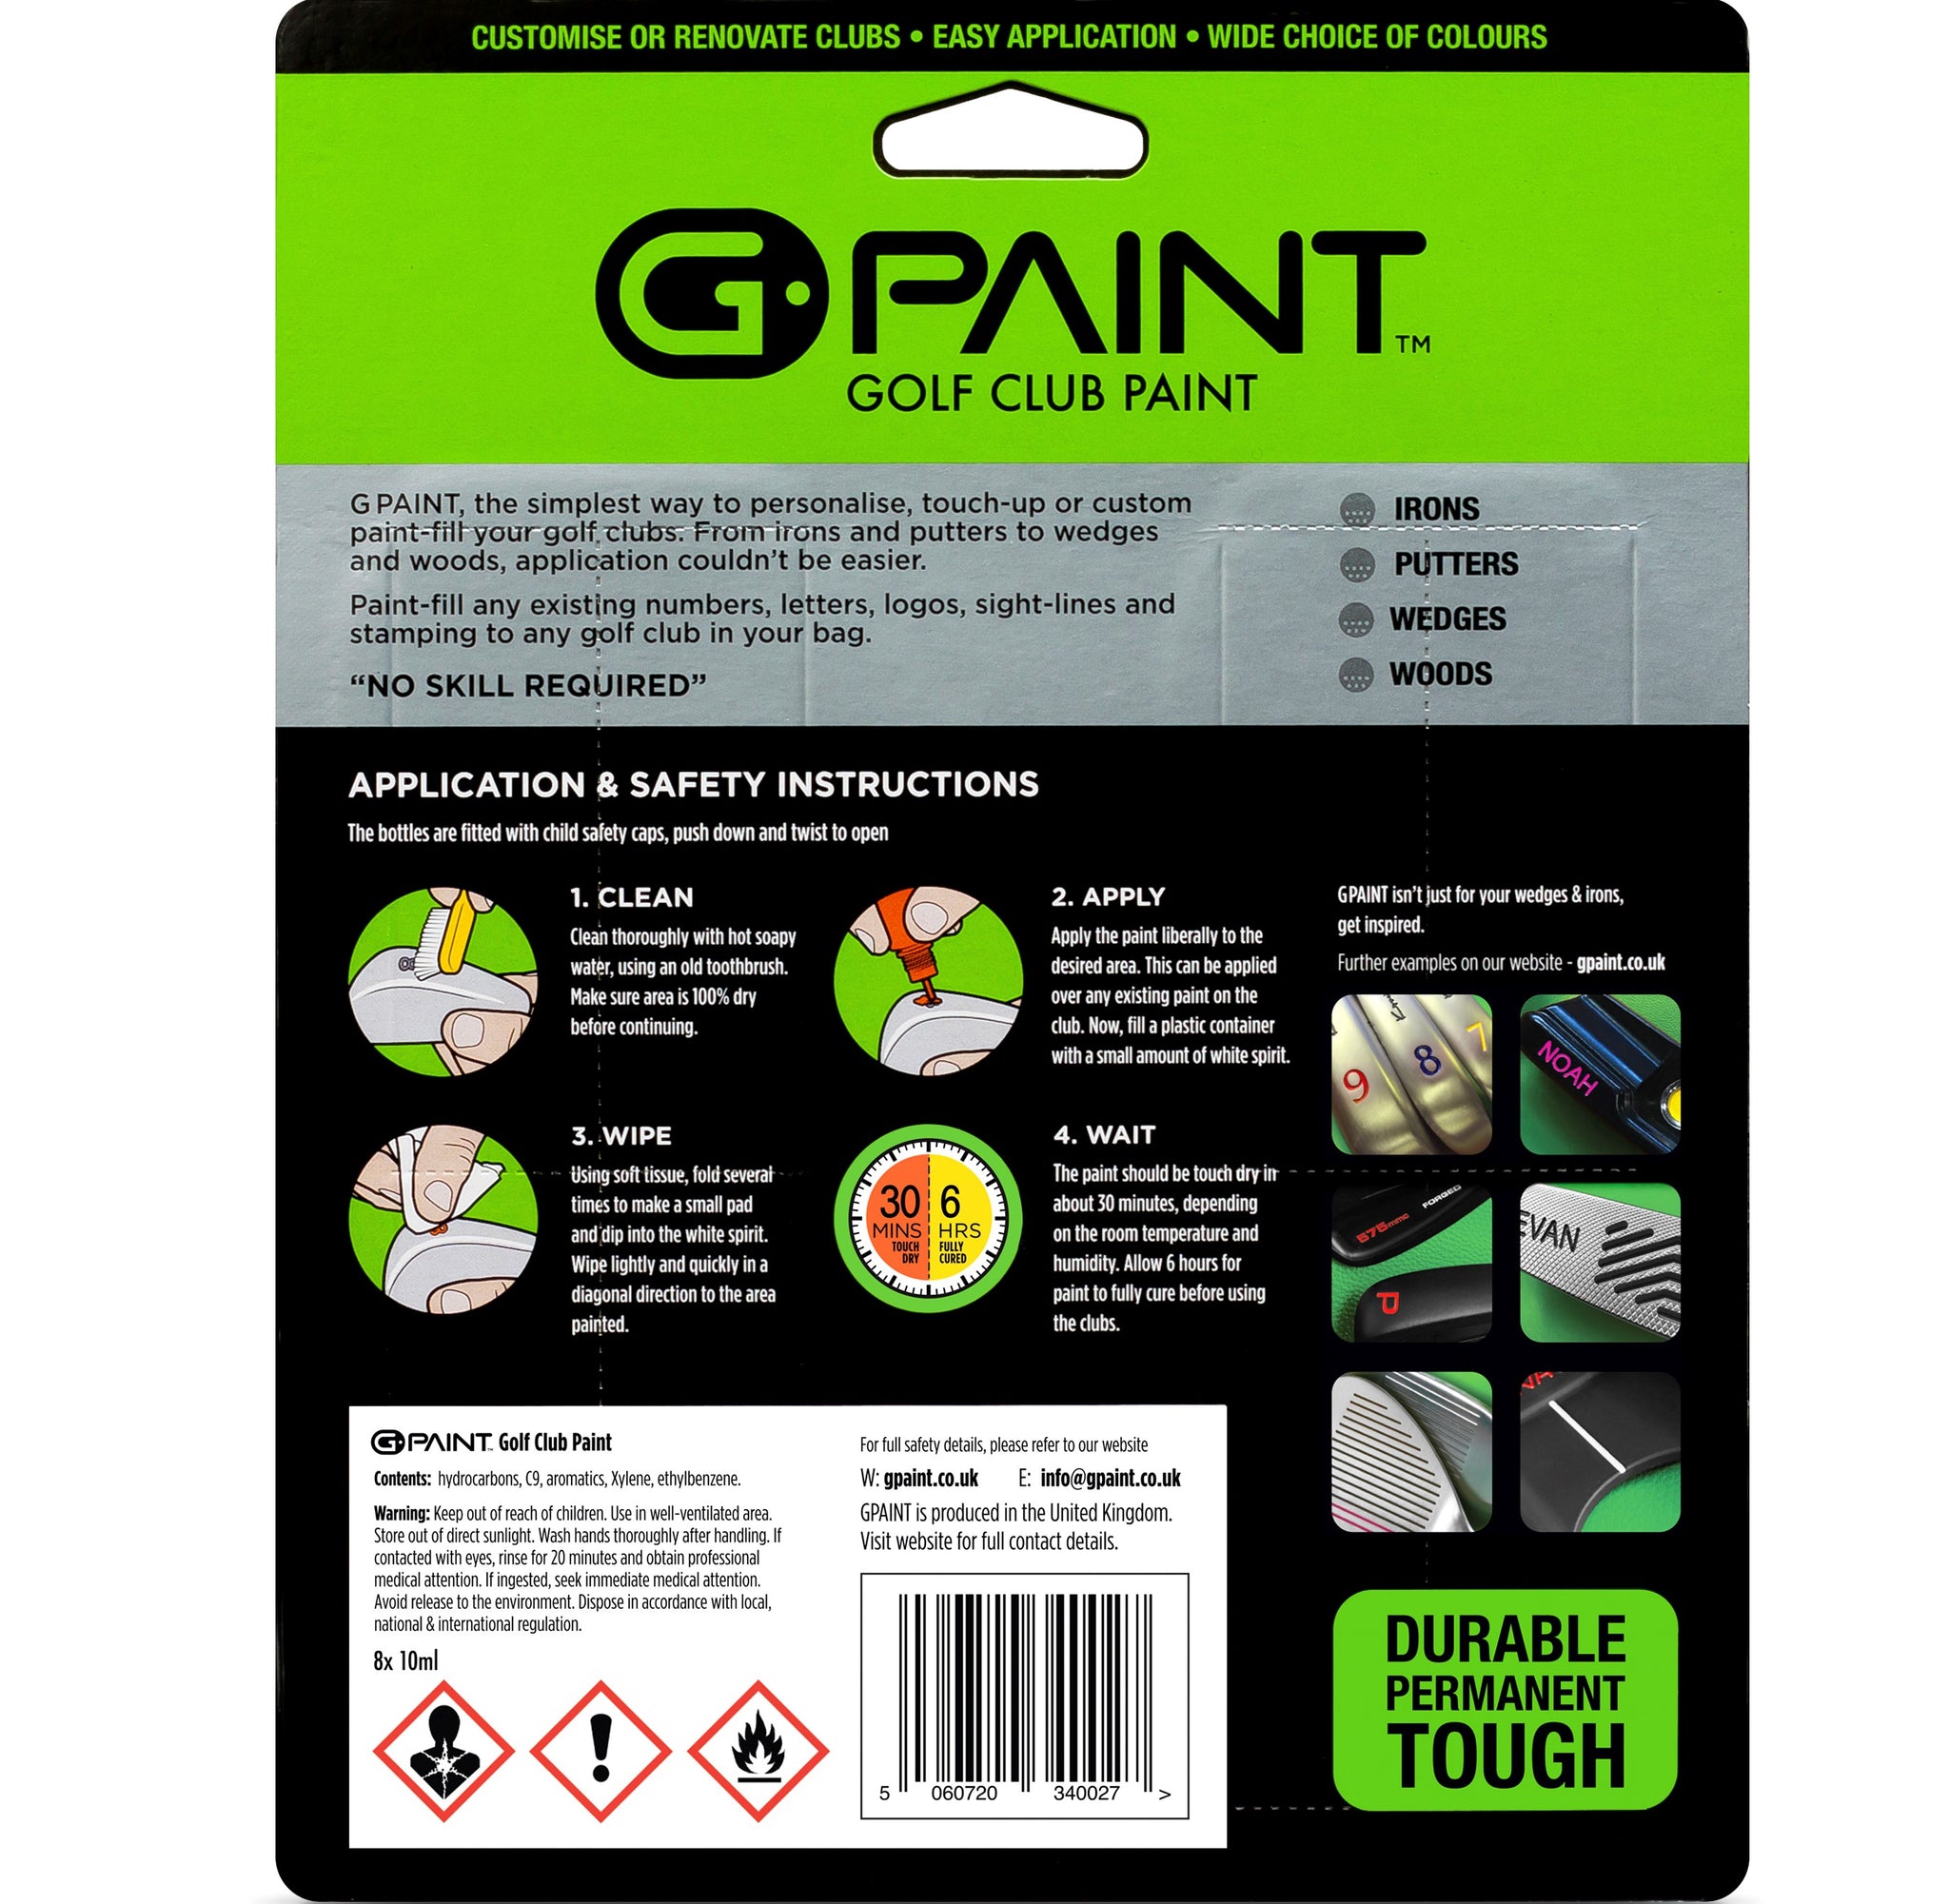 GPaint Golf Club Paint - 4 Pack (Black/White/Red/Blue) at